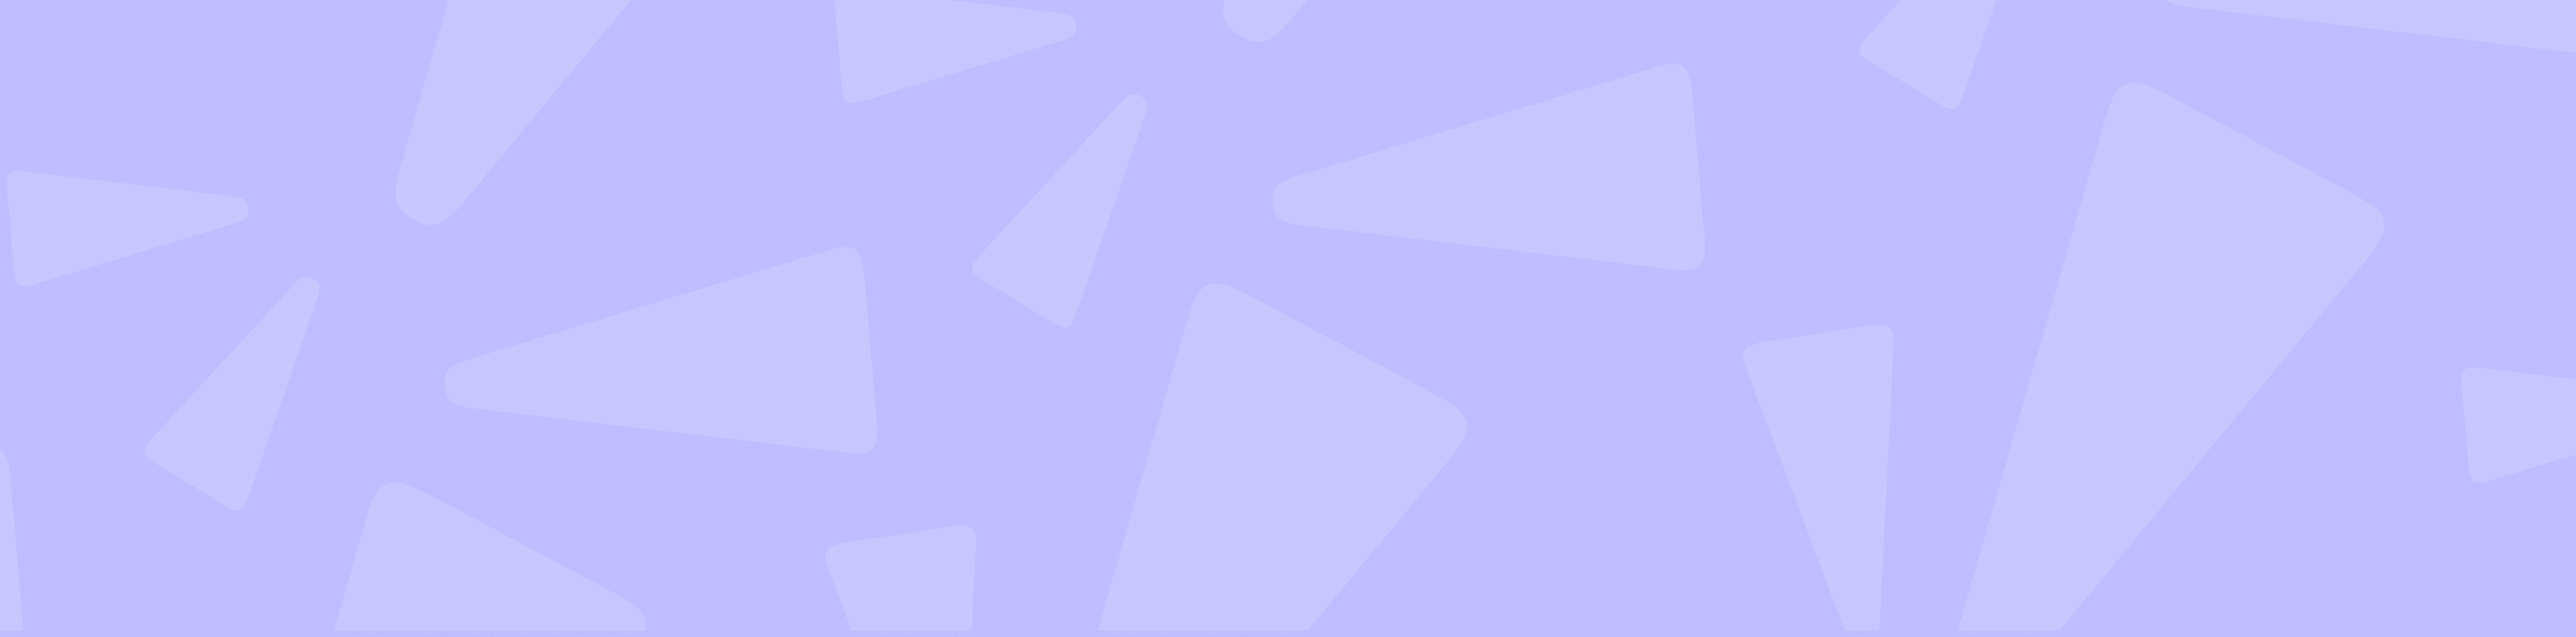 Triangles on purple background